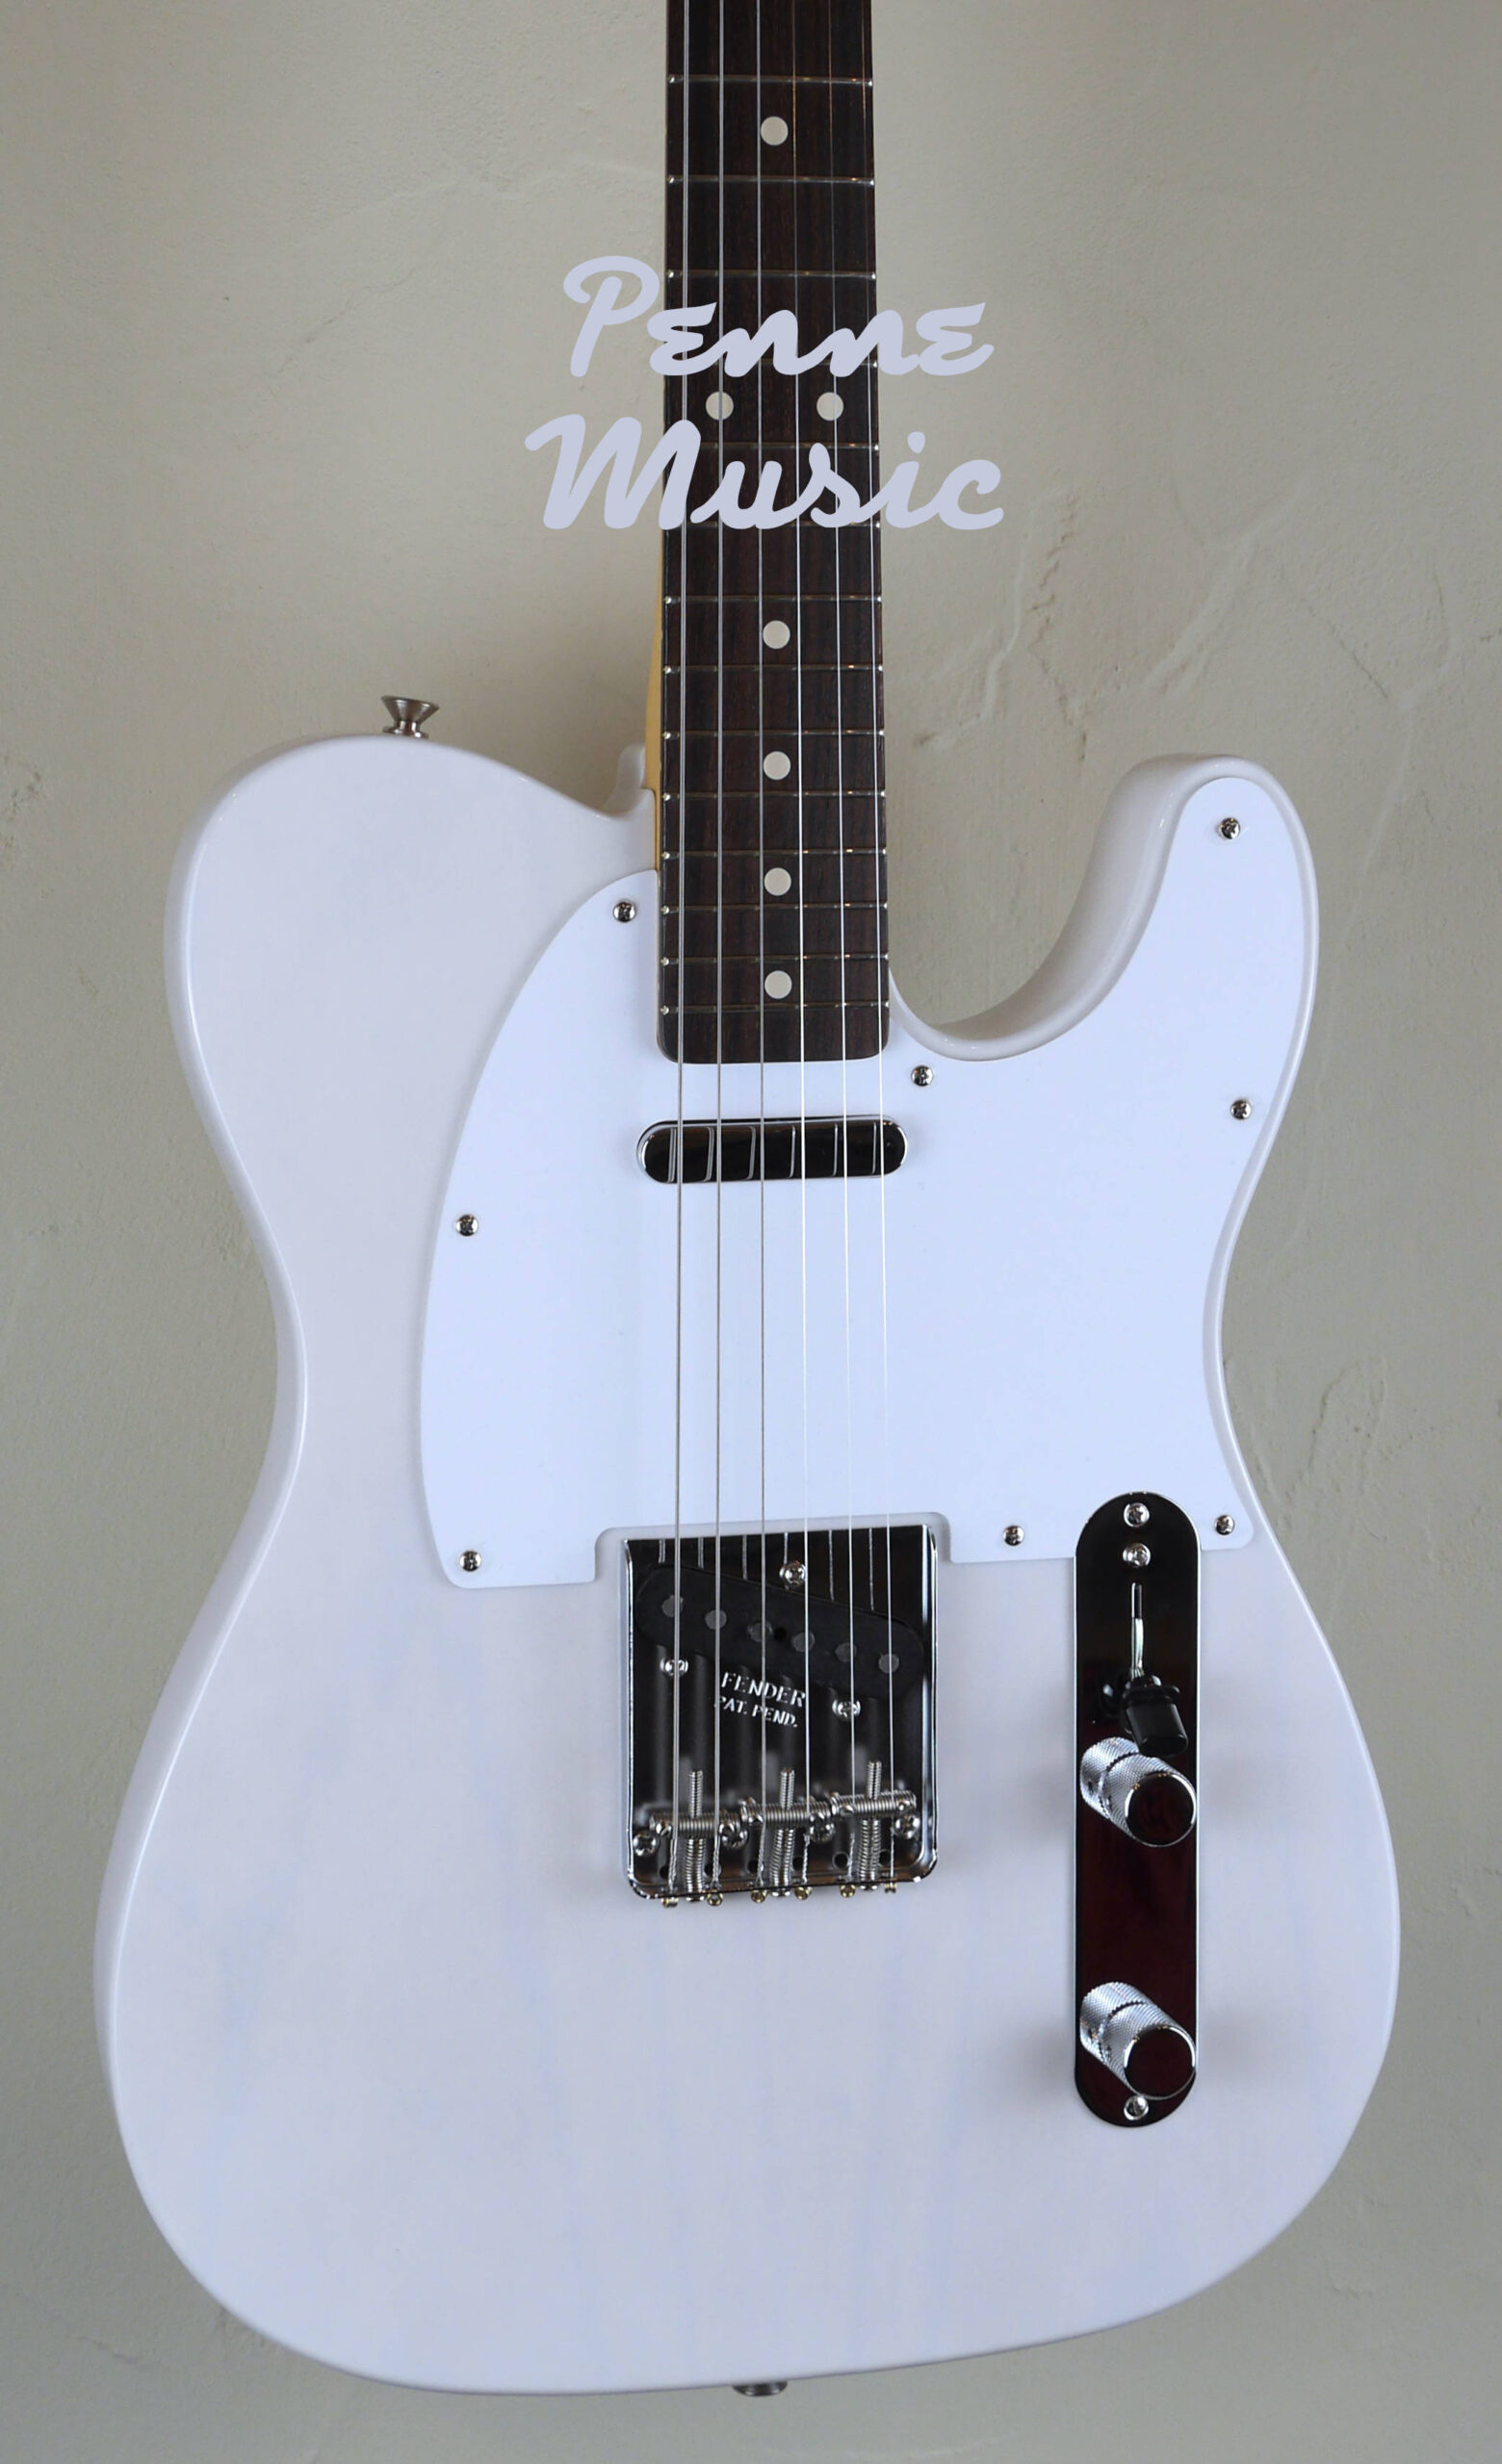 Fender Jimmy Page Mirror Telecaster White Blonde 4